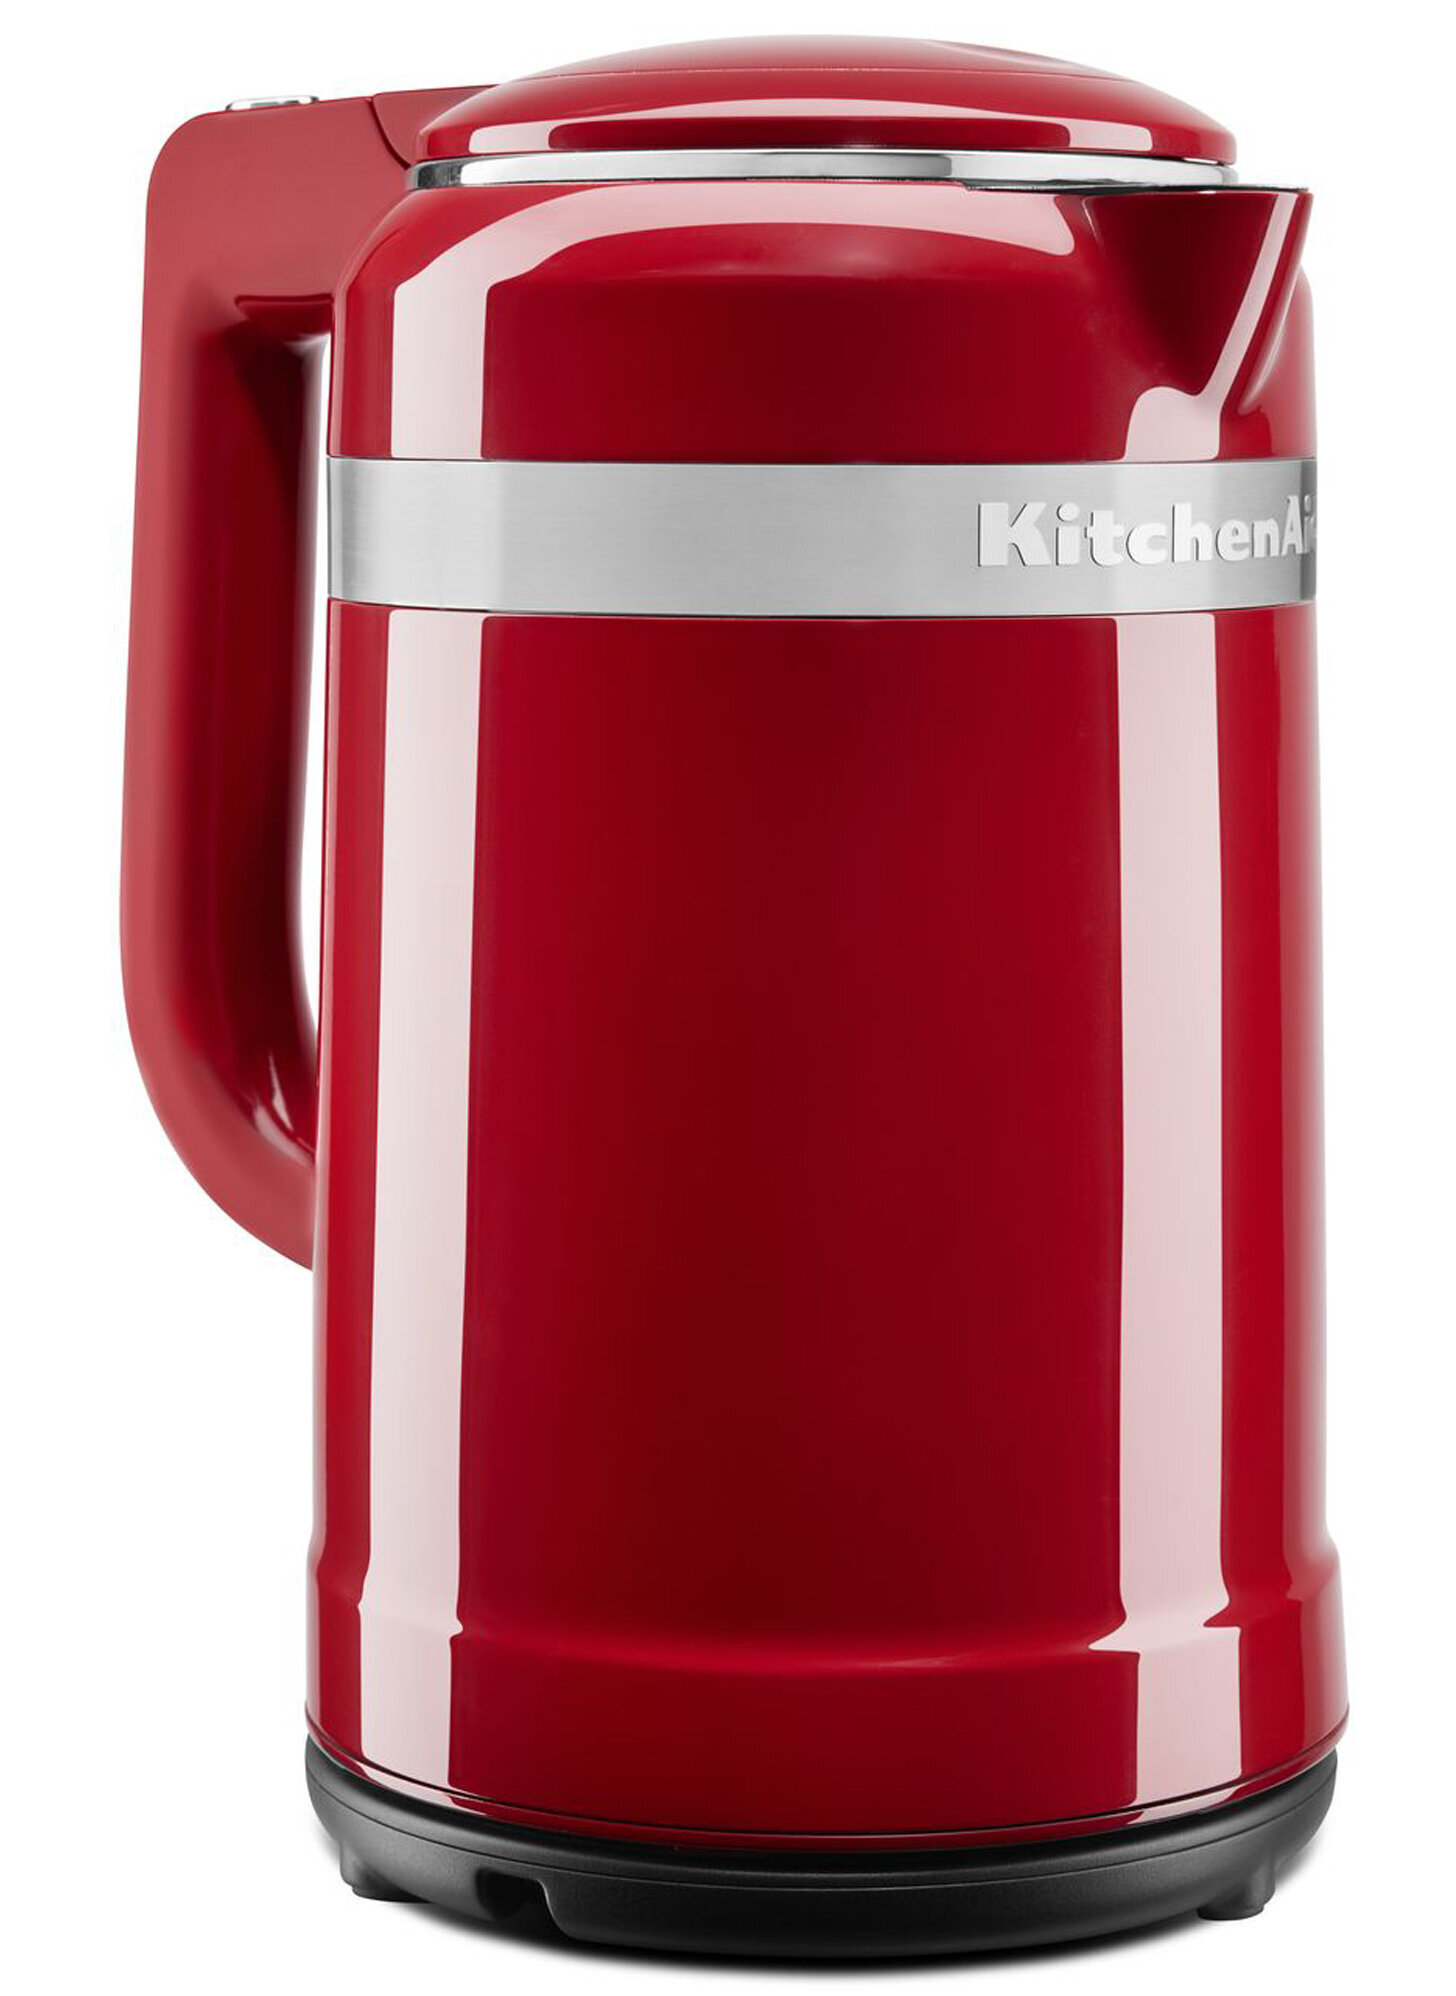 KitchenAid 1.7L Electric Kettle with with Dual Wall Insulation Empire Red 5KEK1565AER